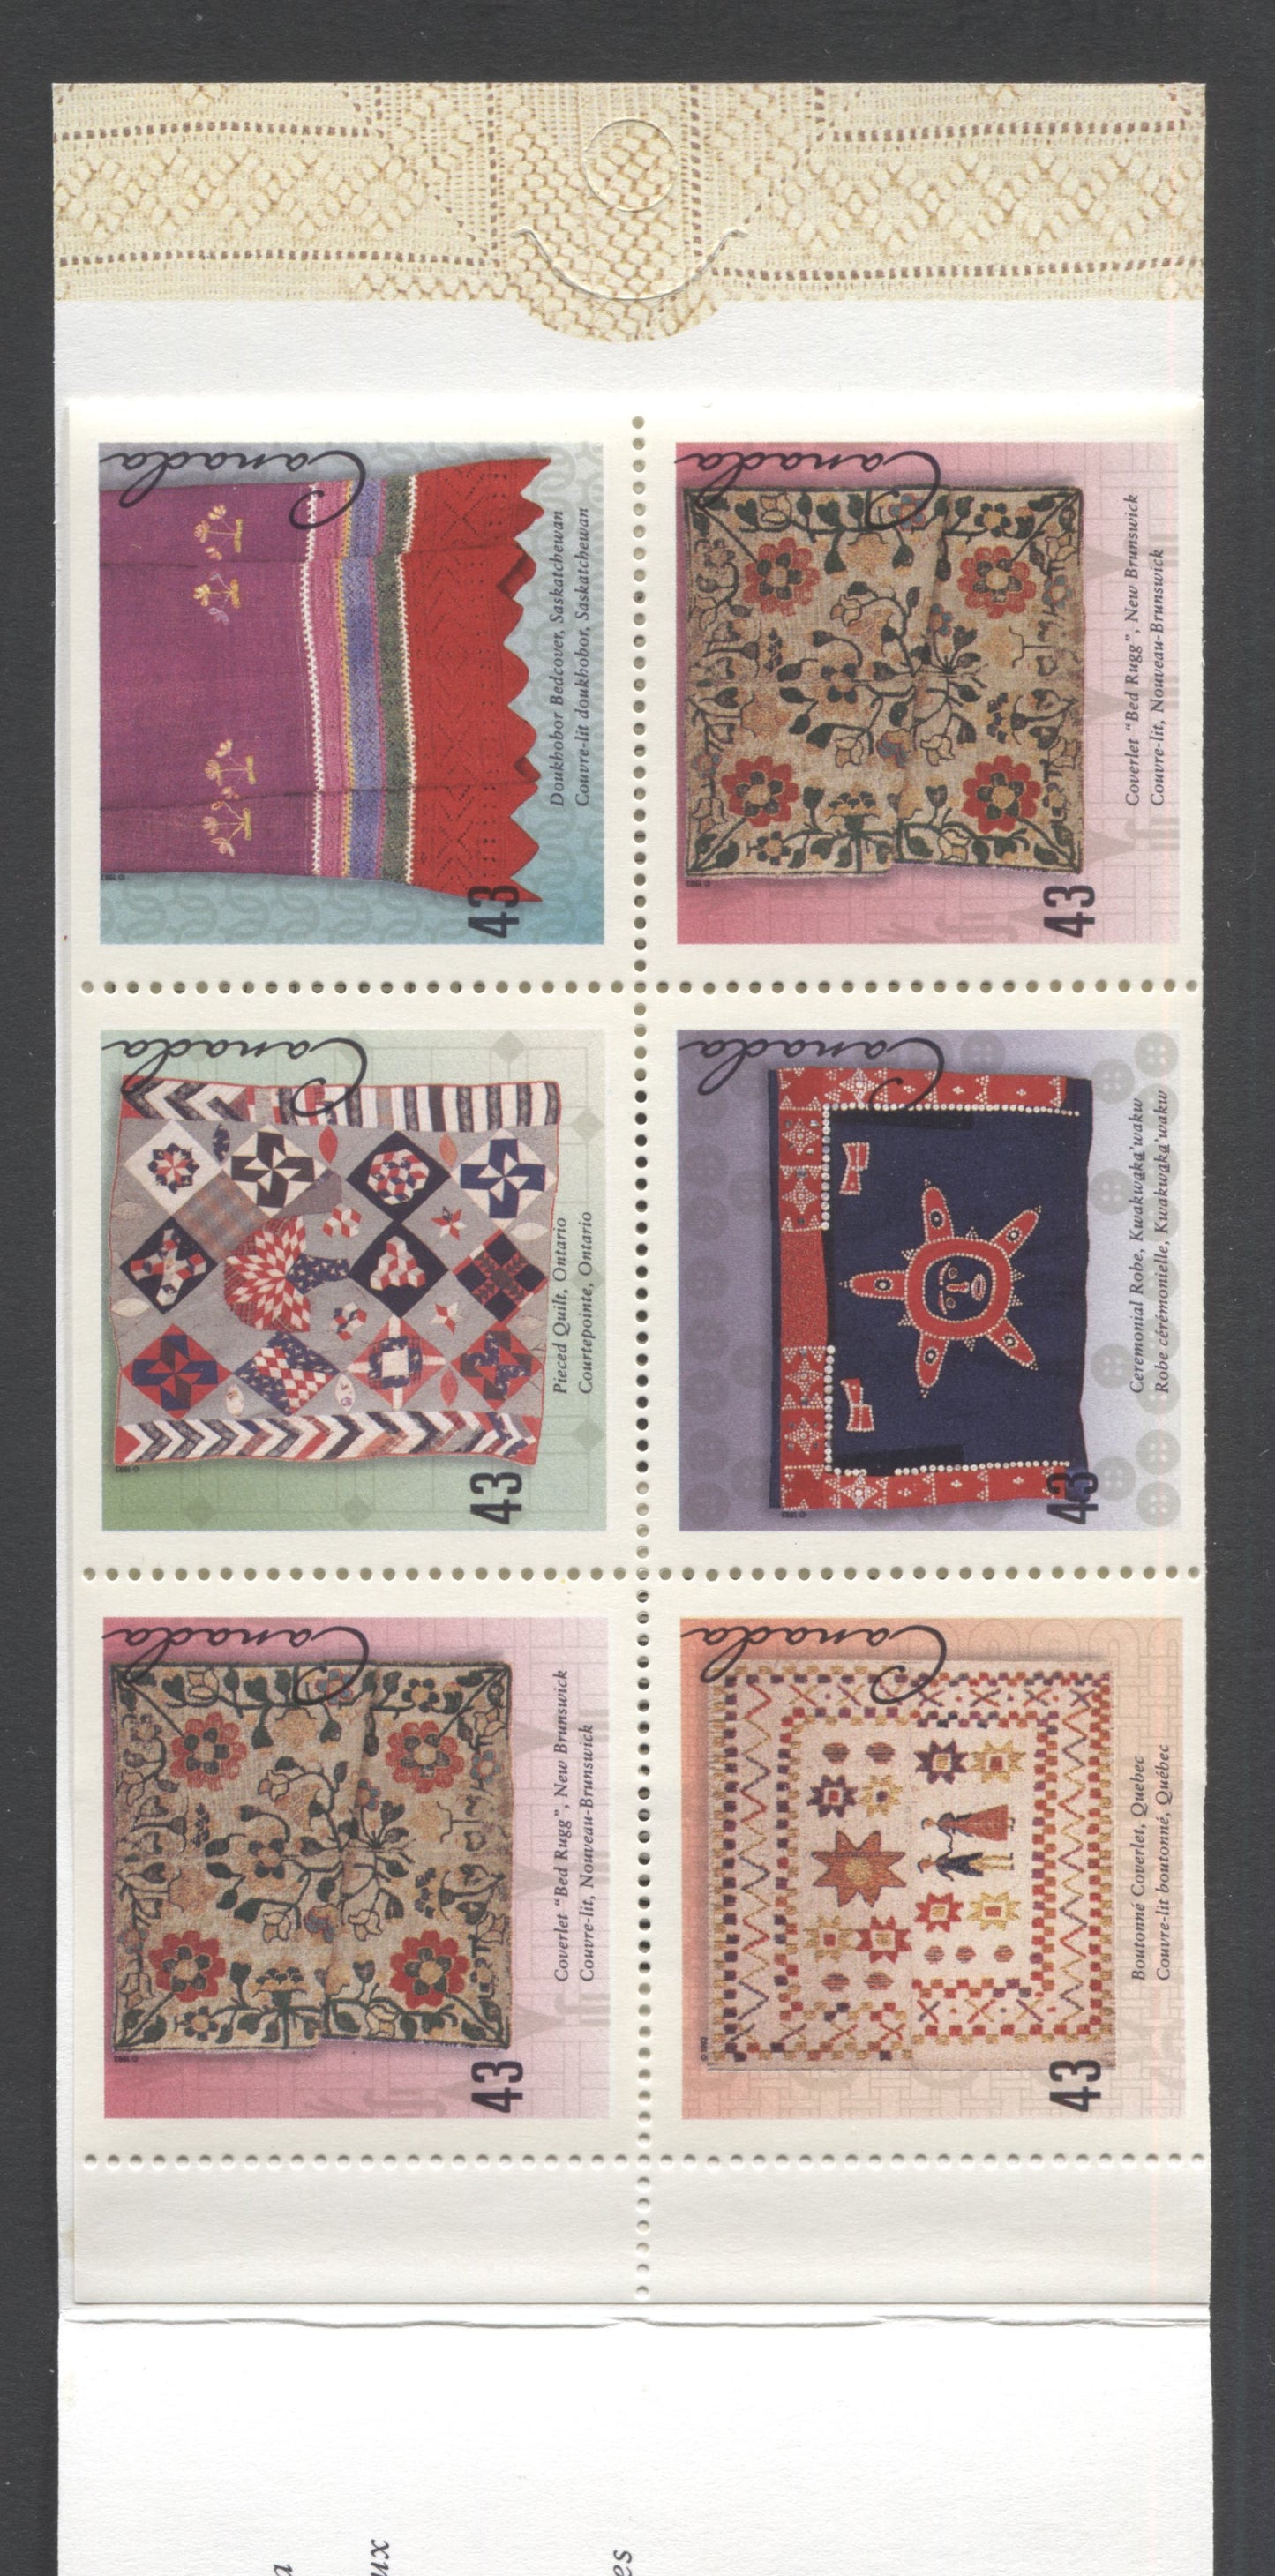 Canada #BK159a-b 1993 Hand Crafted Textiles Issue, Complete $4.30  Booklet, Harrison Paper, Dead Paper, 4 mm GT-4 Tagging